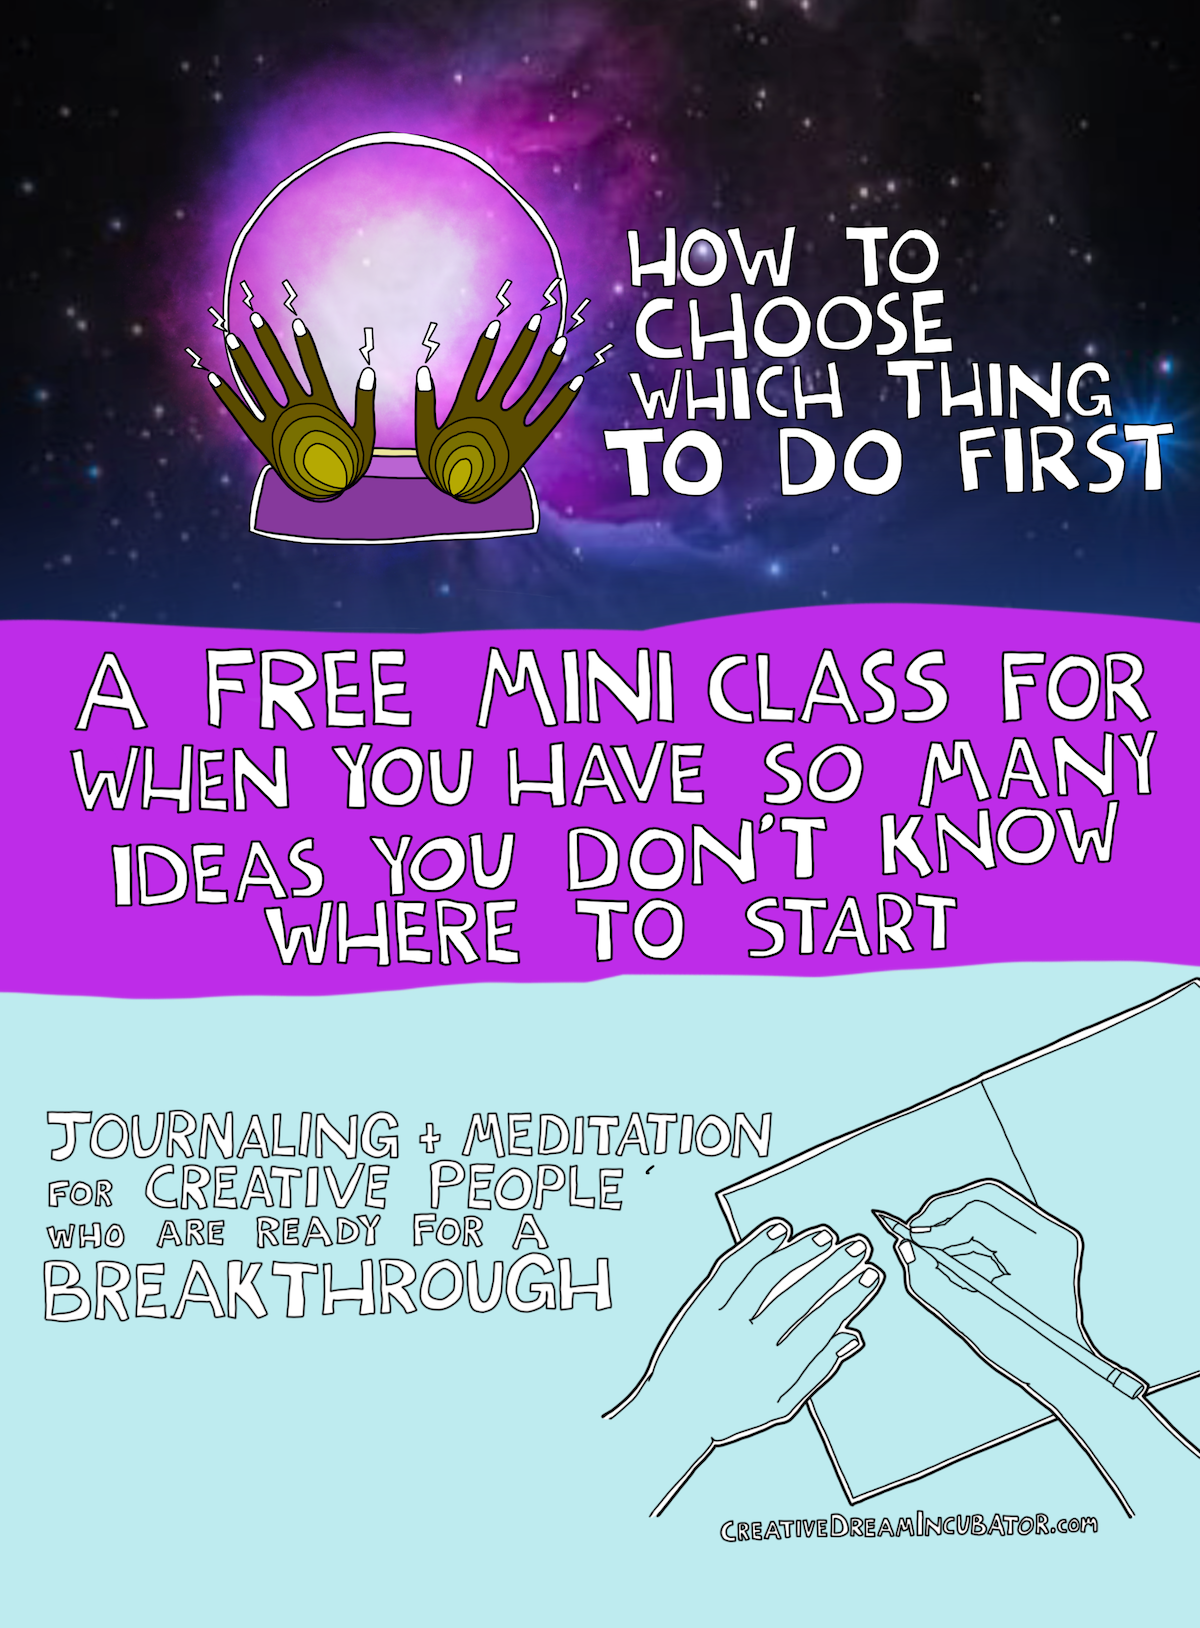 How to choose which thing to do first